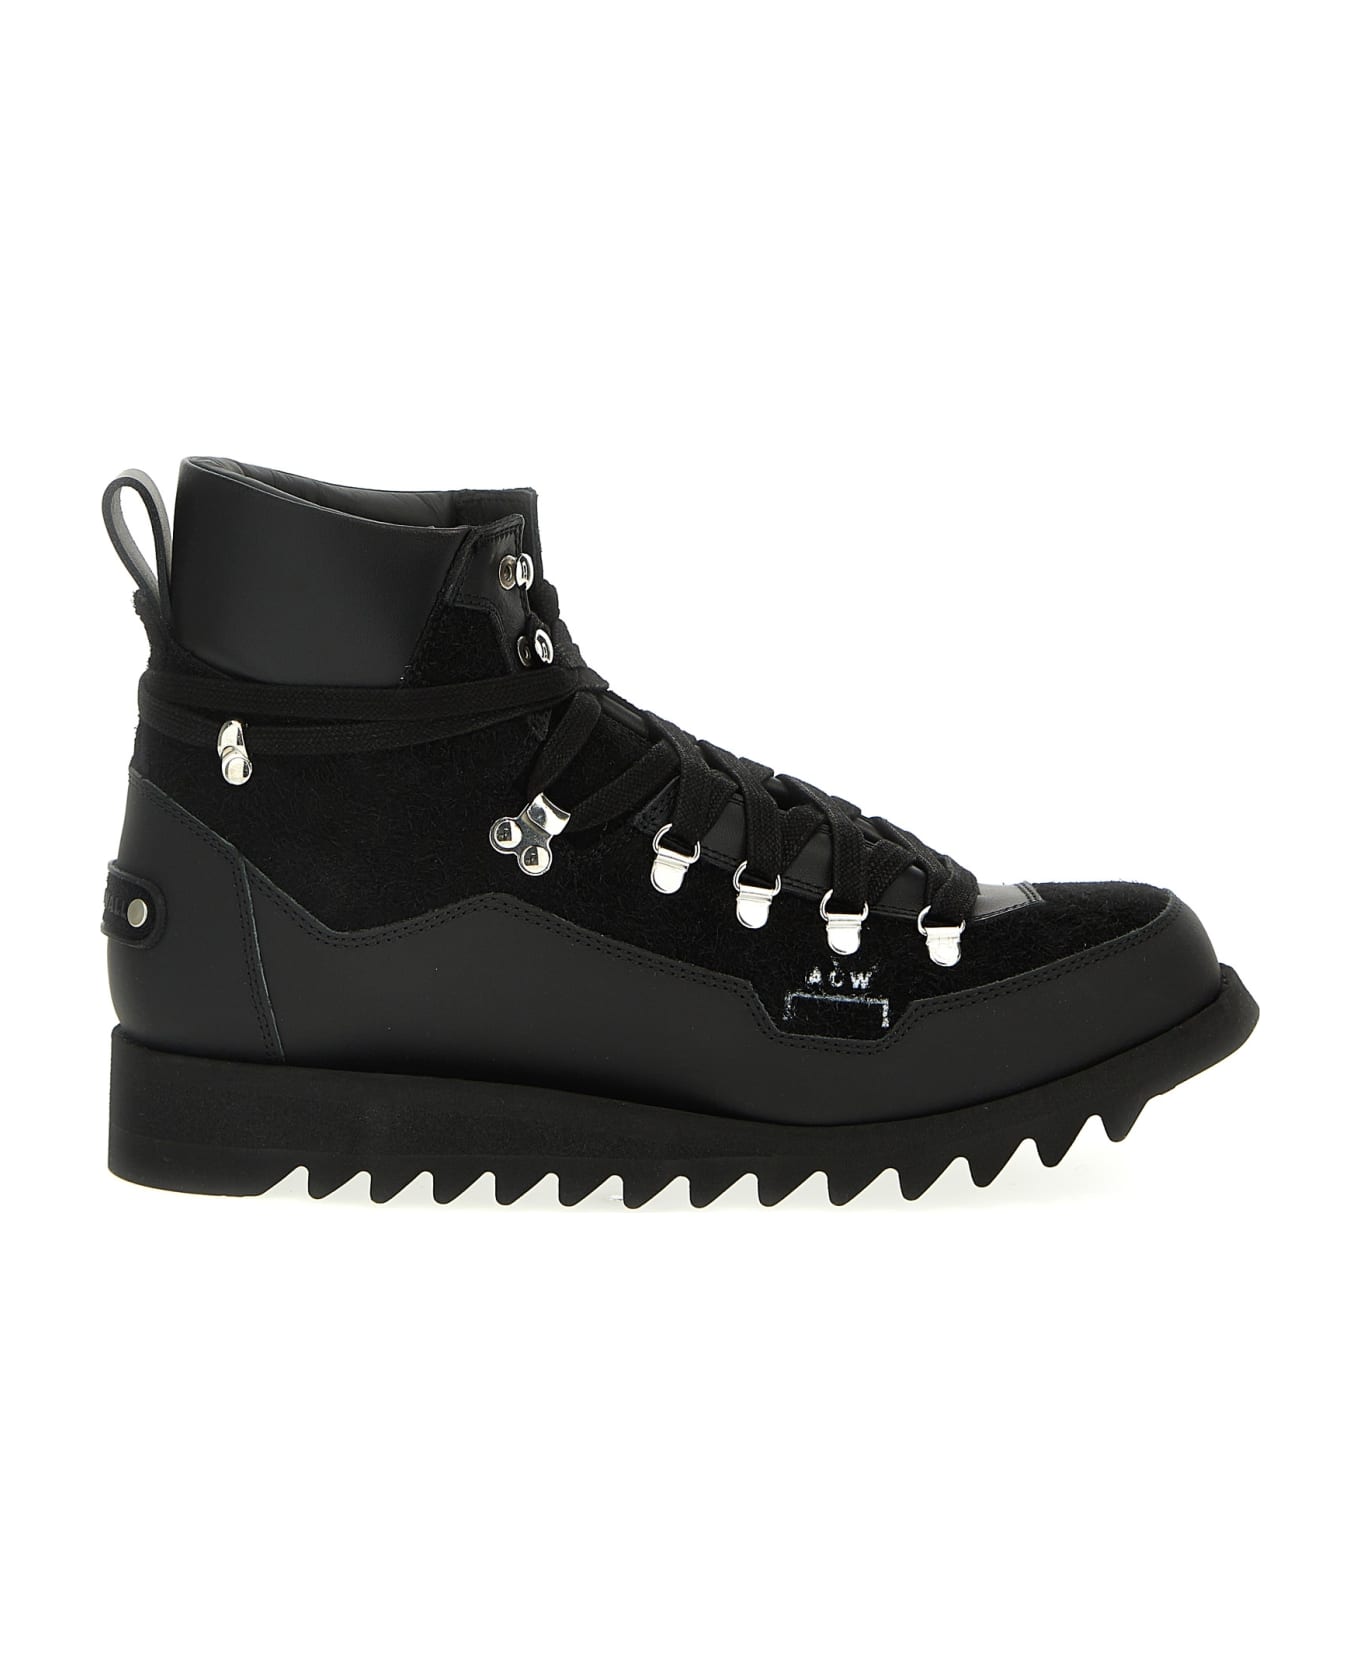 A-COLD-WALL 'alpine' Ankle Boots - Black  